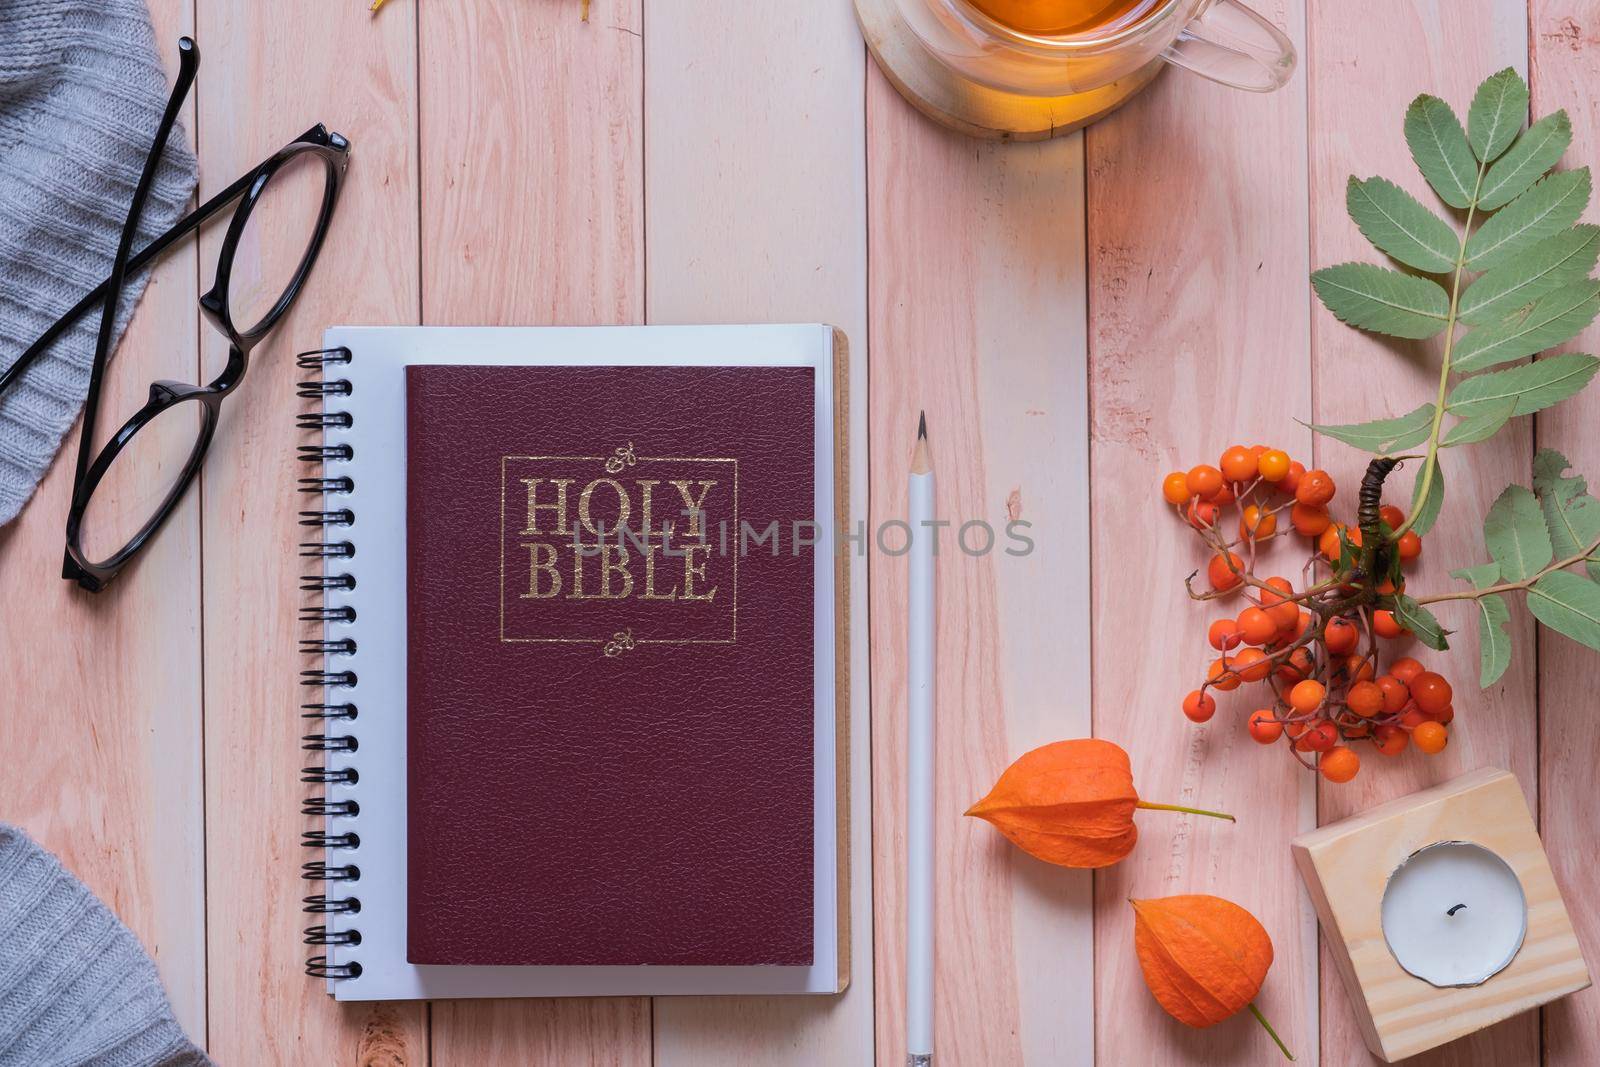 Holy bible and autumn cozy top view on wooden background. Bible study autumn concept by ssvimaliss